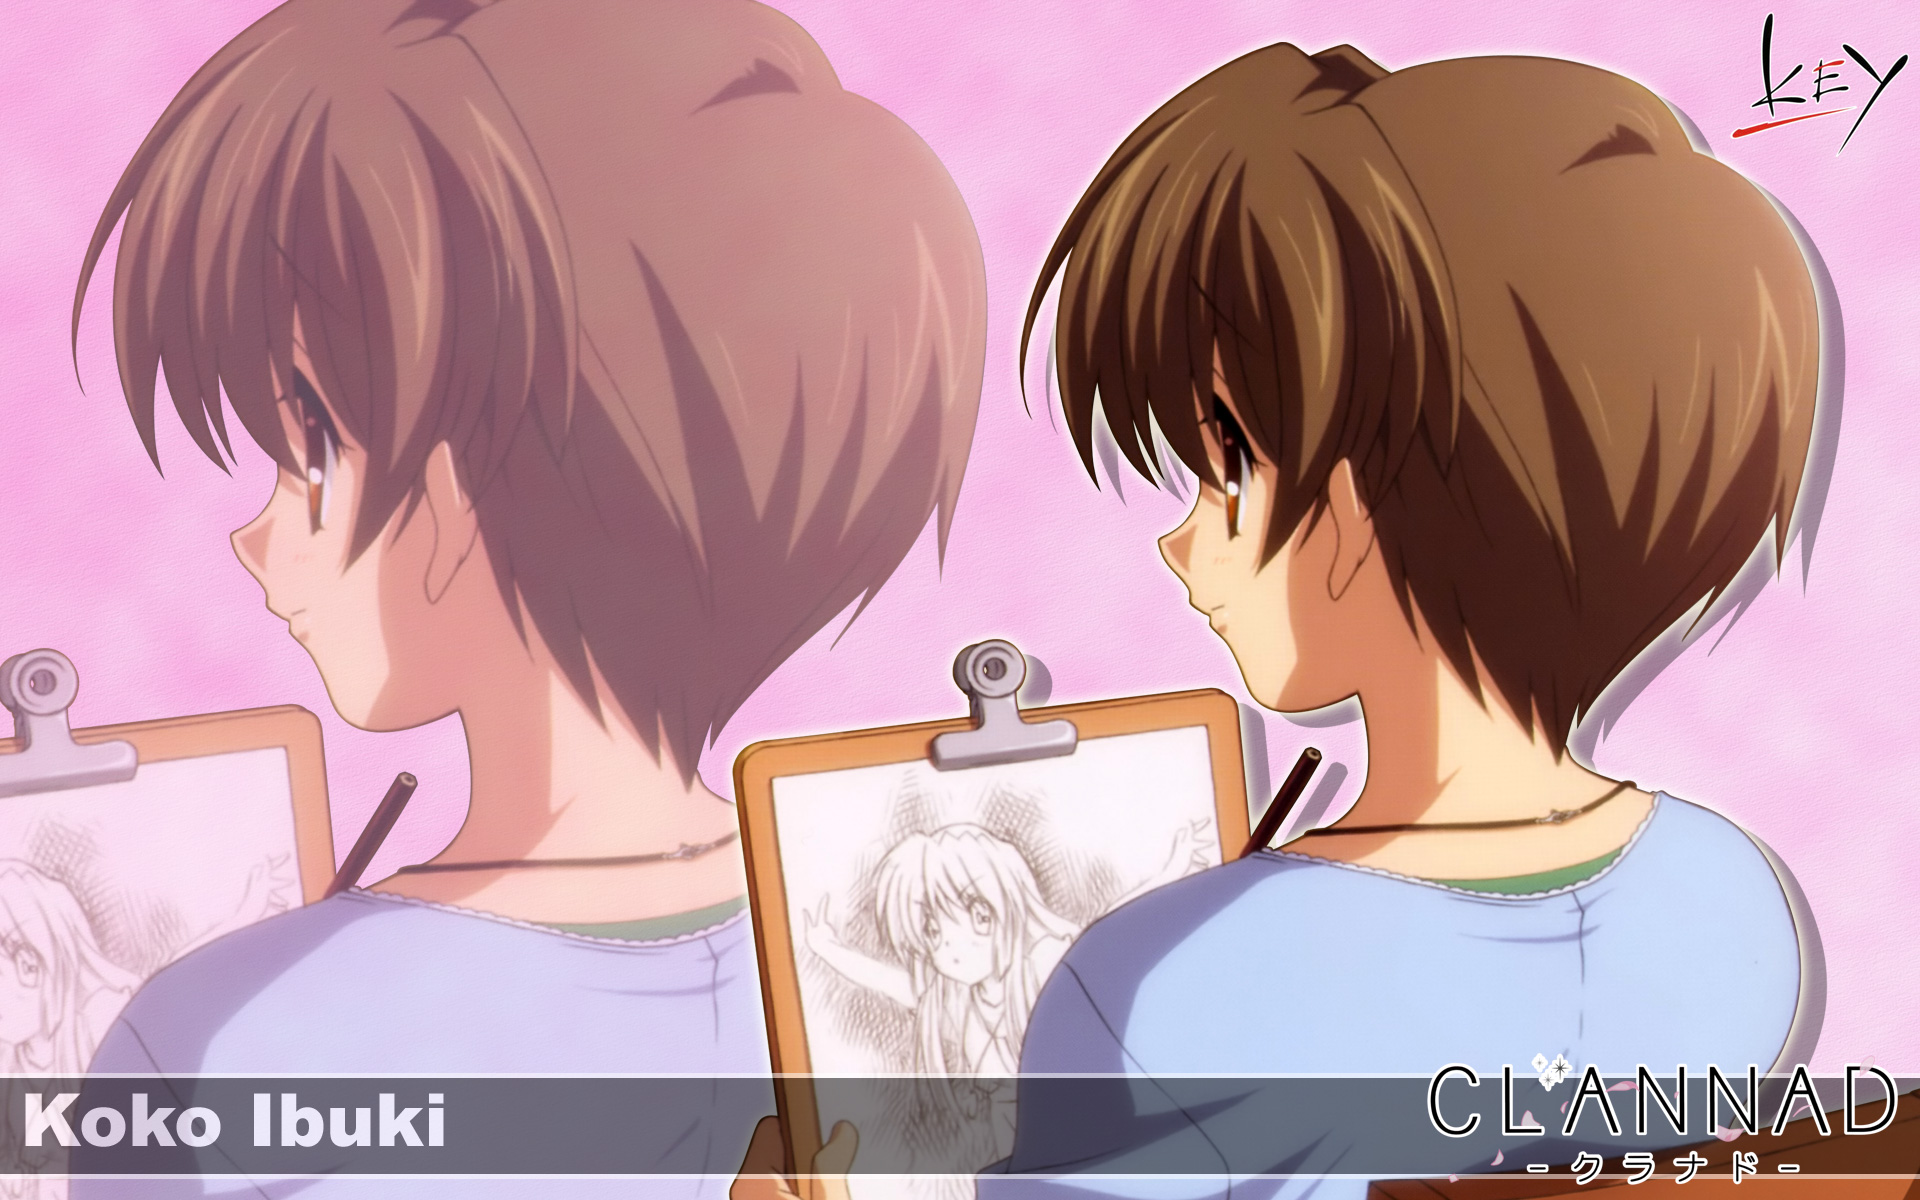 Kouko Ibuki from Clannad anime, a serene and captivating character with a peaceful backdrop